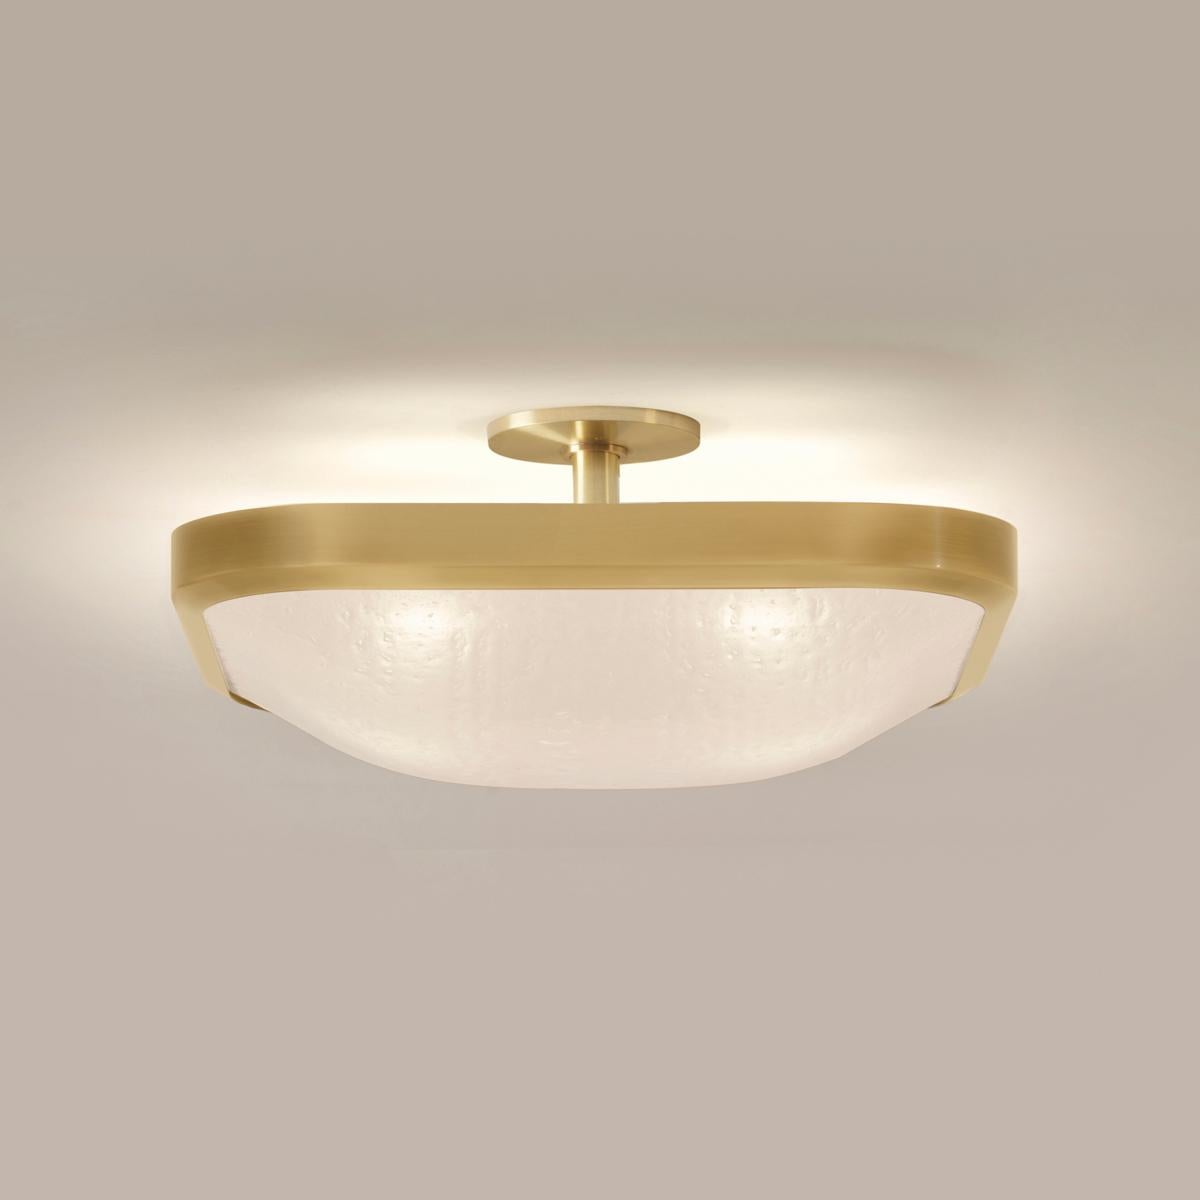 Uno Square Ceiling Light by Gaspare Asaro-Polished Brass Finish In New Condition For Sale In New York, NY